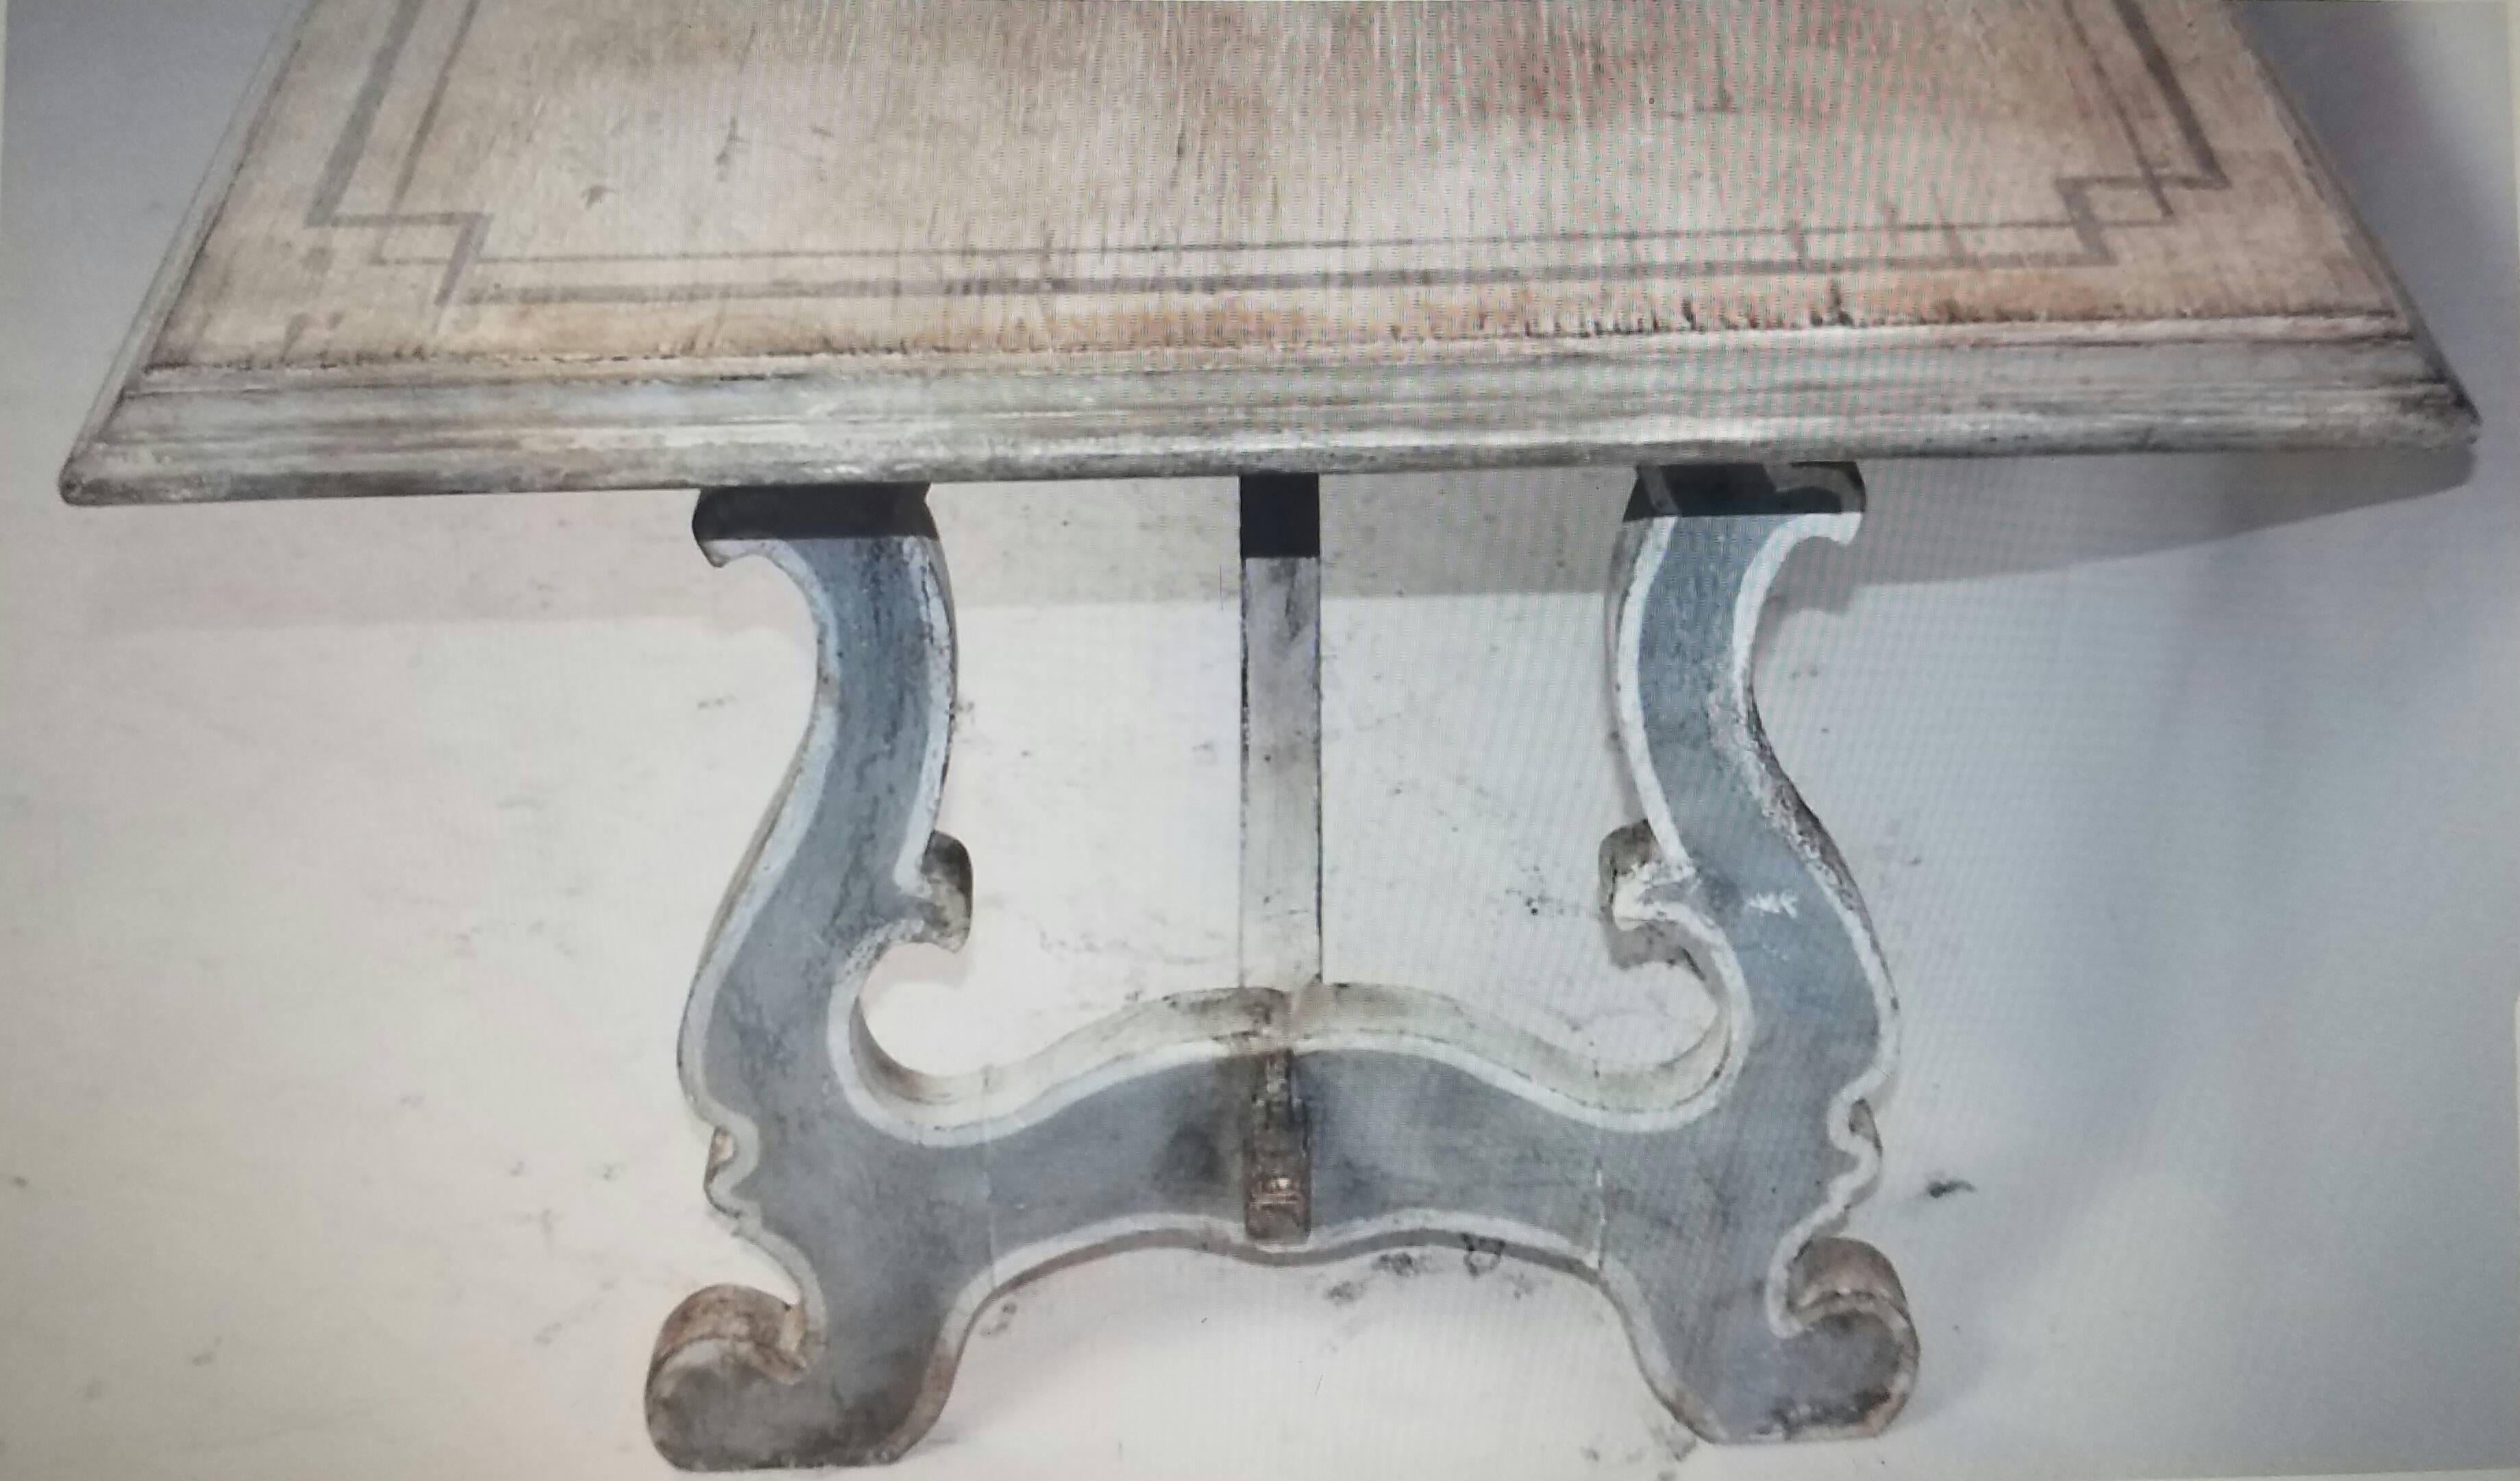 This antique Italian trestle table has beautiful grey painted striping and an amazing distressed finish on the top and legs. It's a real stunning piece.